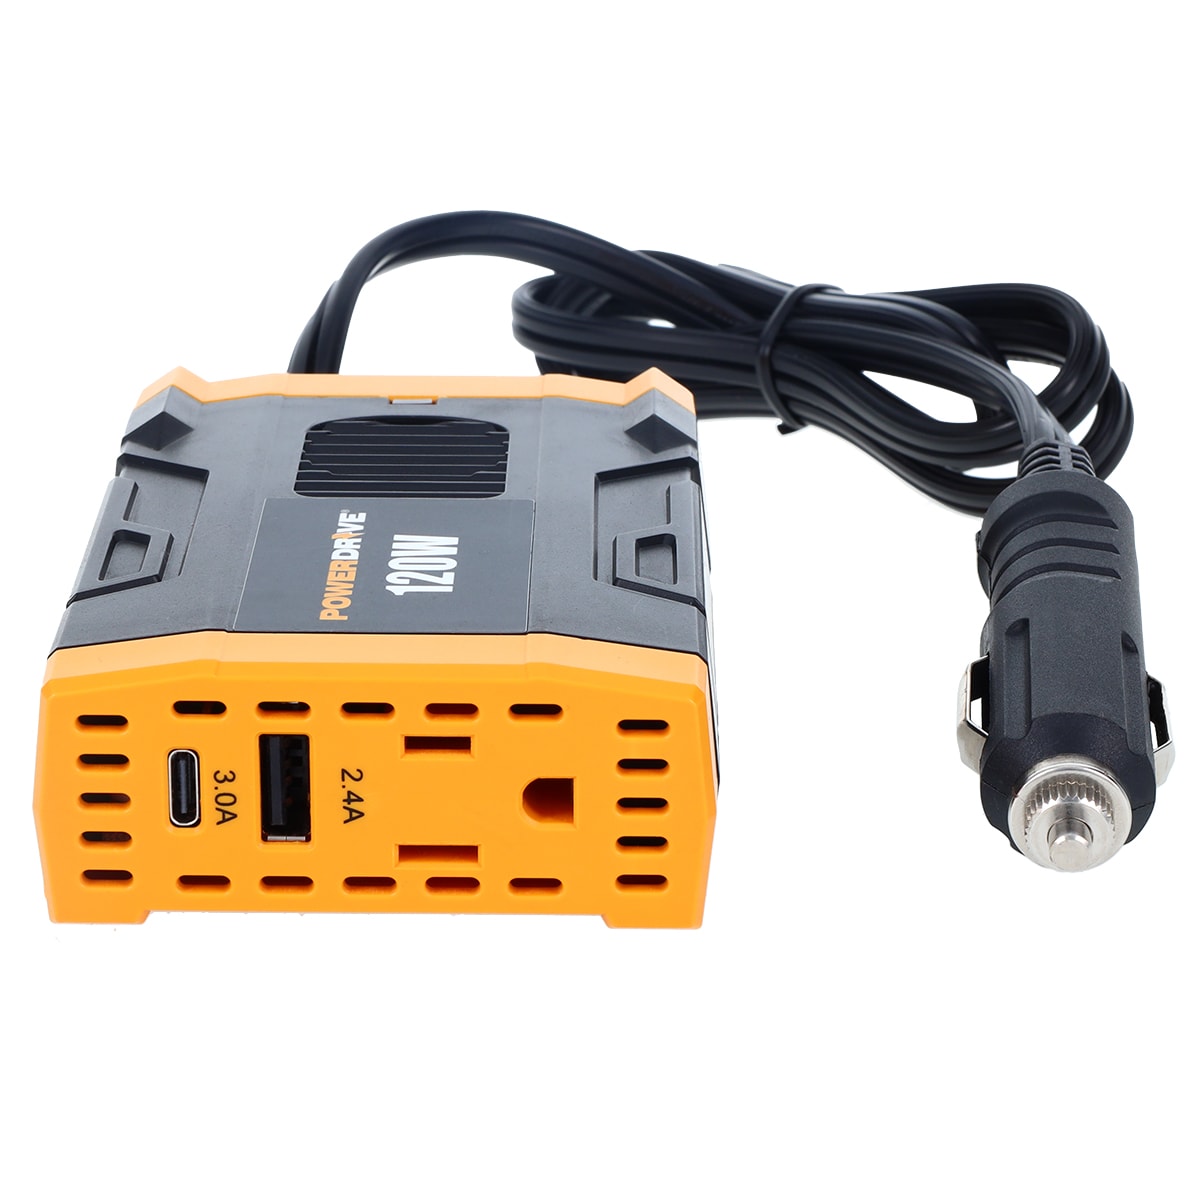 PowerDrive 120W Power Inverter with 3 Outlets - Charge Laptops